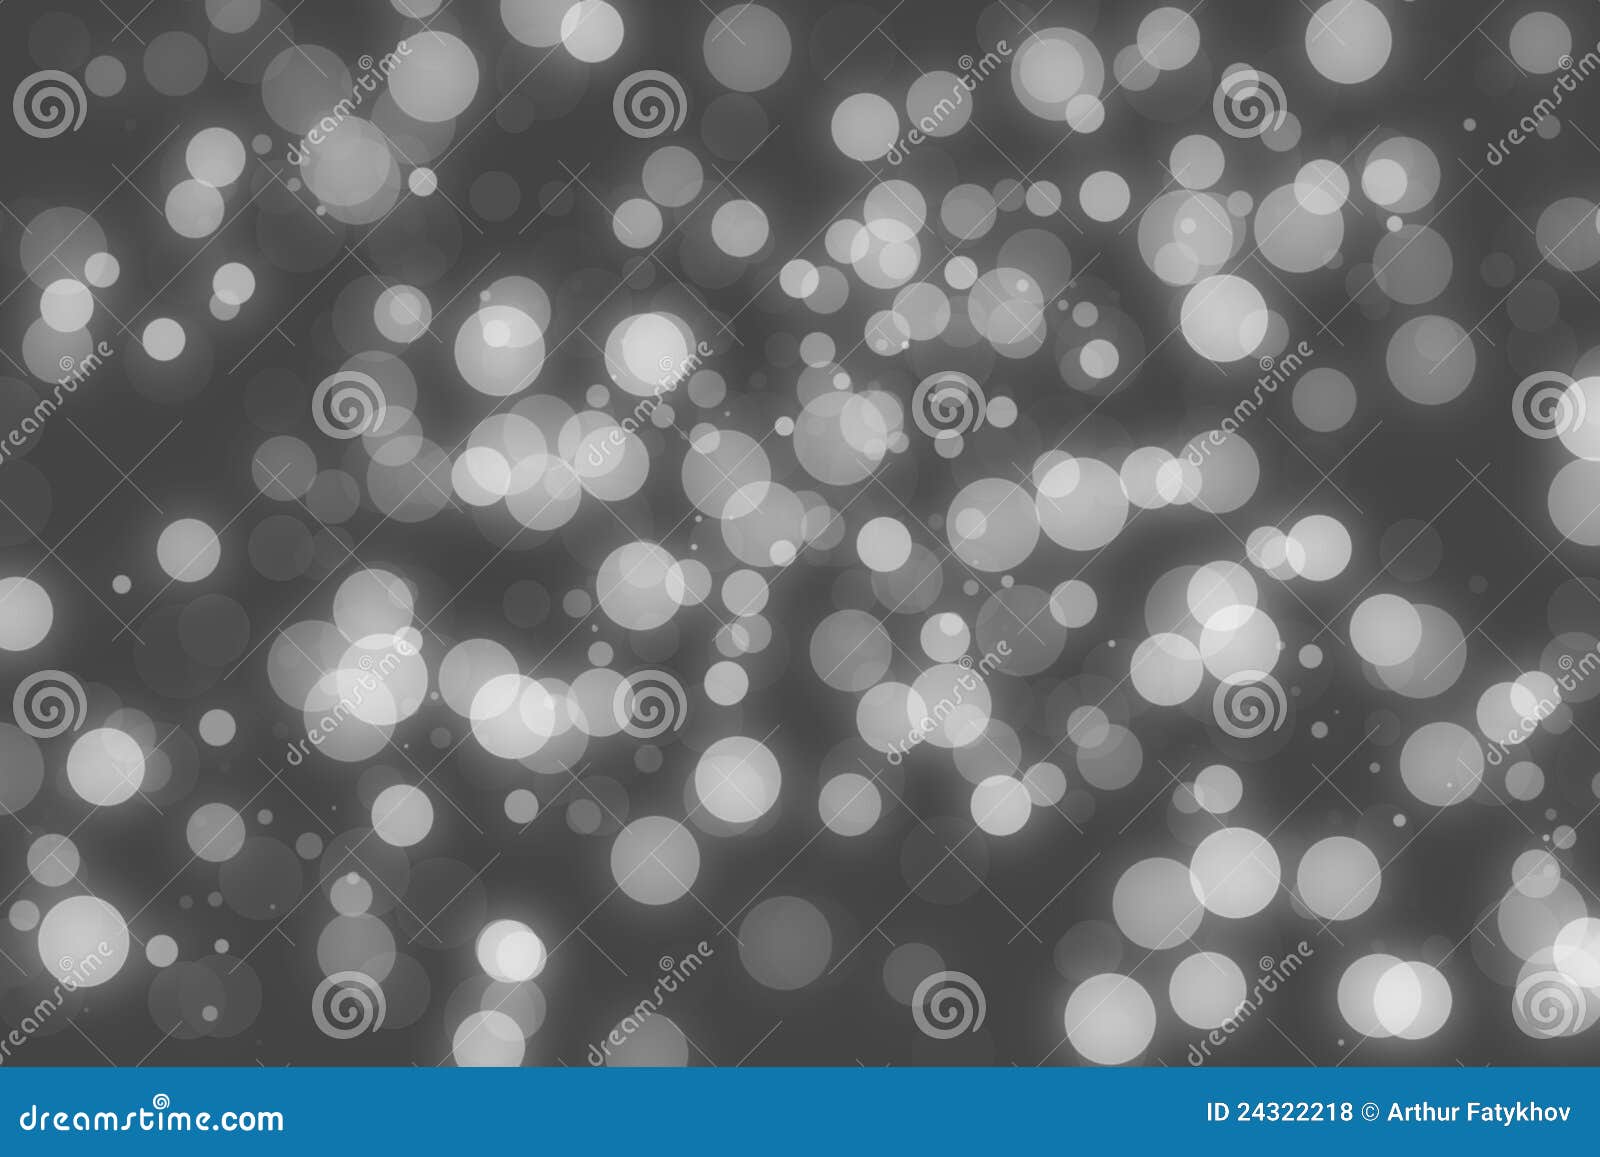 Monochrome abstract art background in style bokeh.